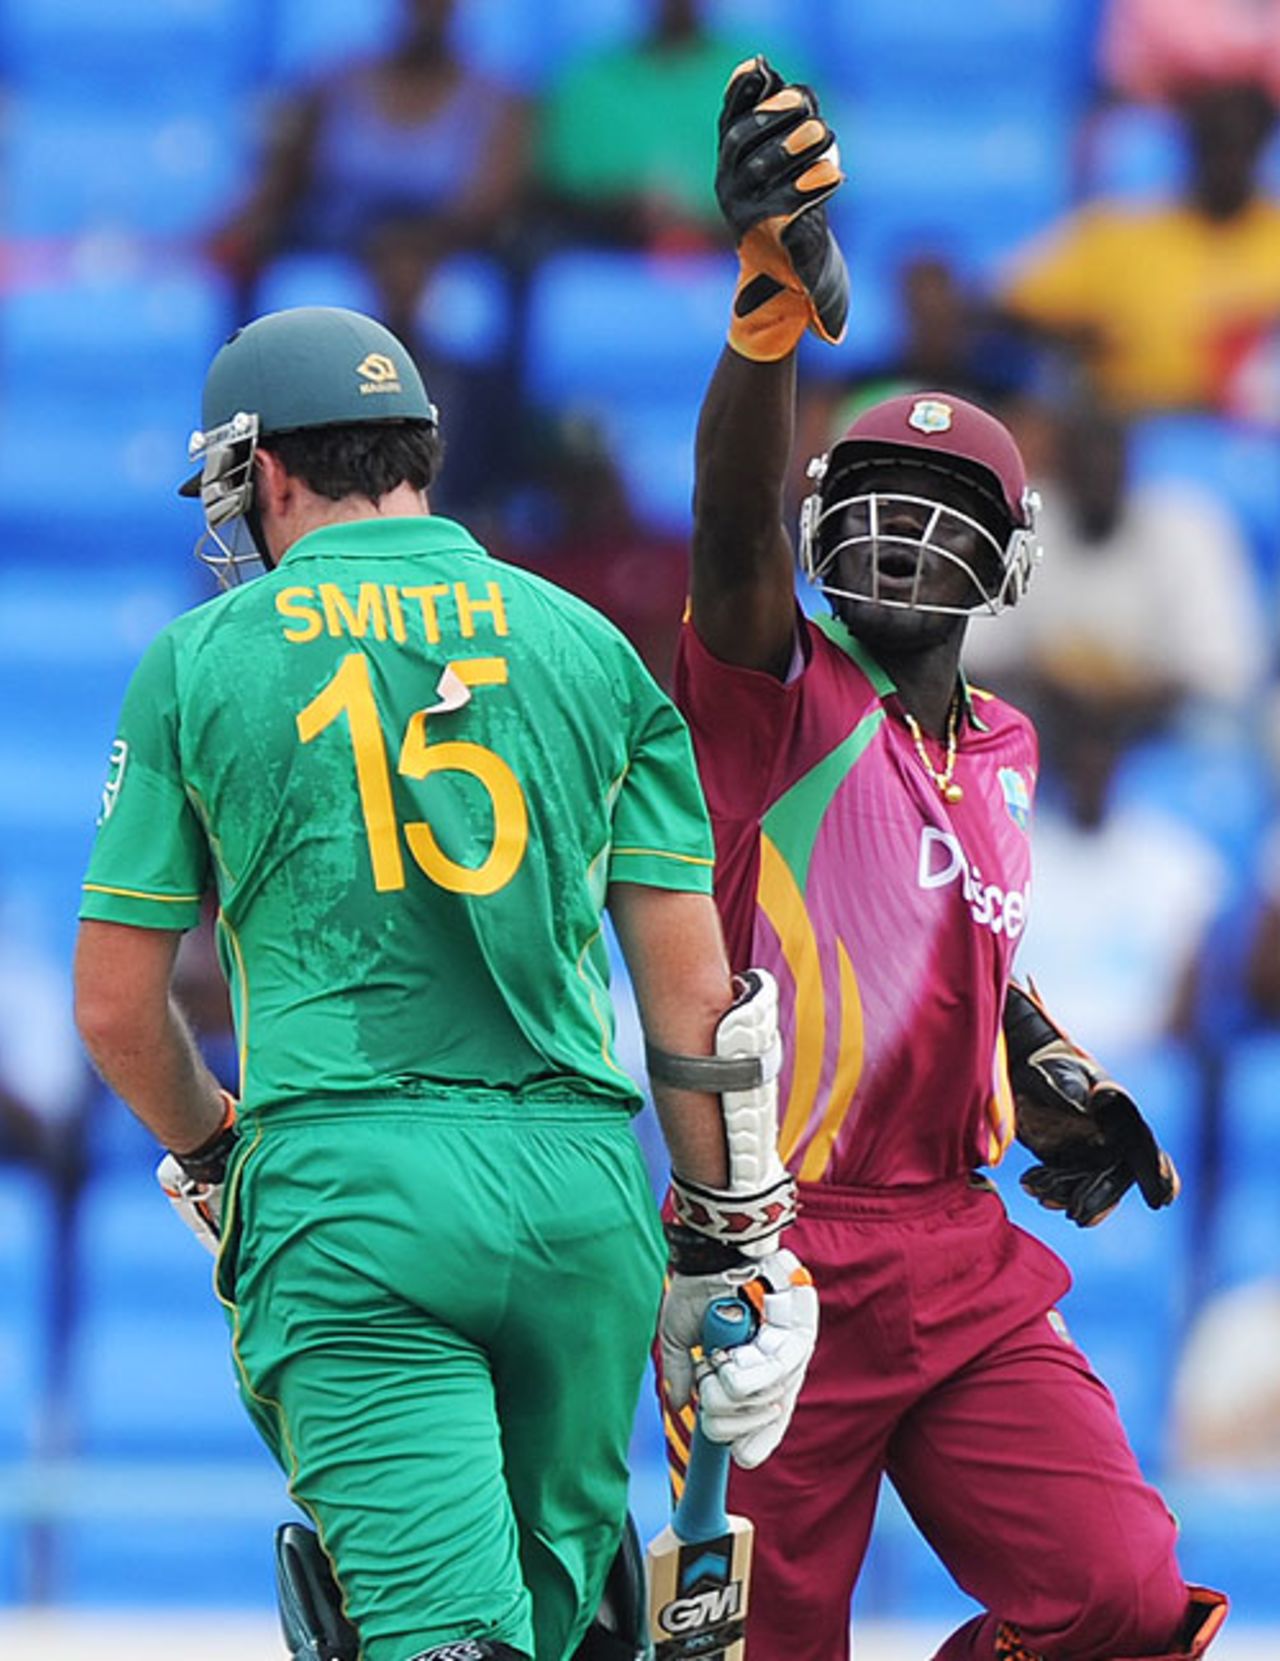 Graeme Smith gave himself out stumped despite being in his ground when the bails were removed. West Indies v South Africa, 1st Twenty20, Antigua, May 19, 2010